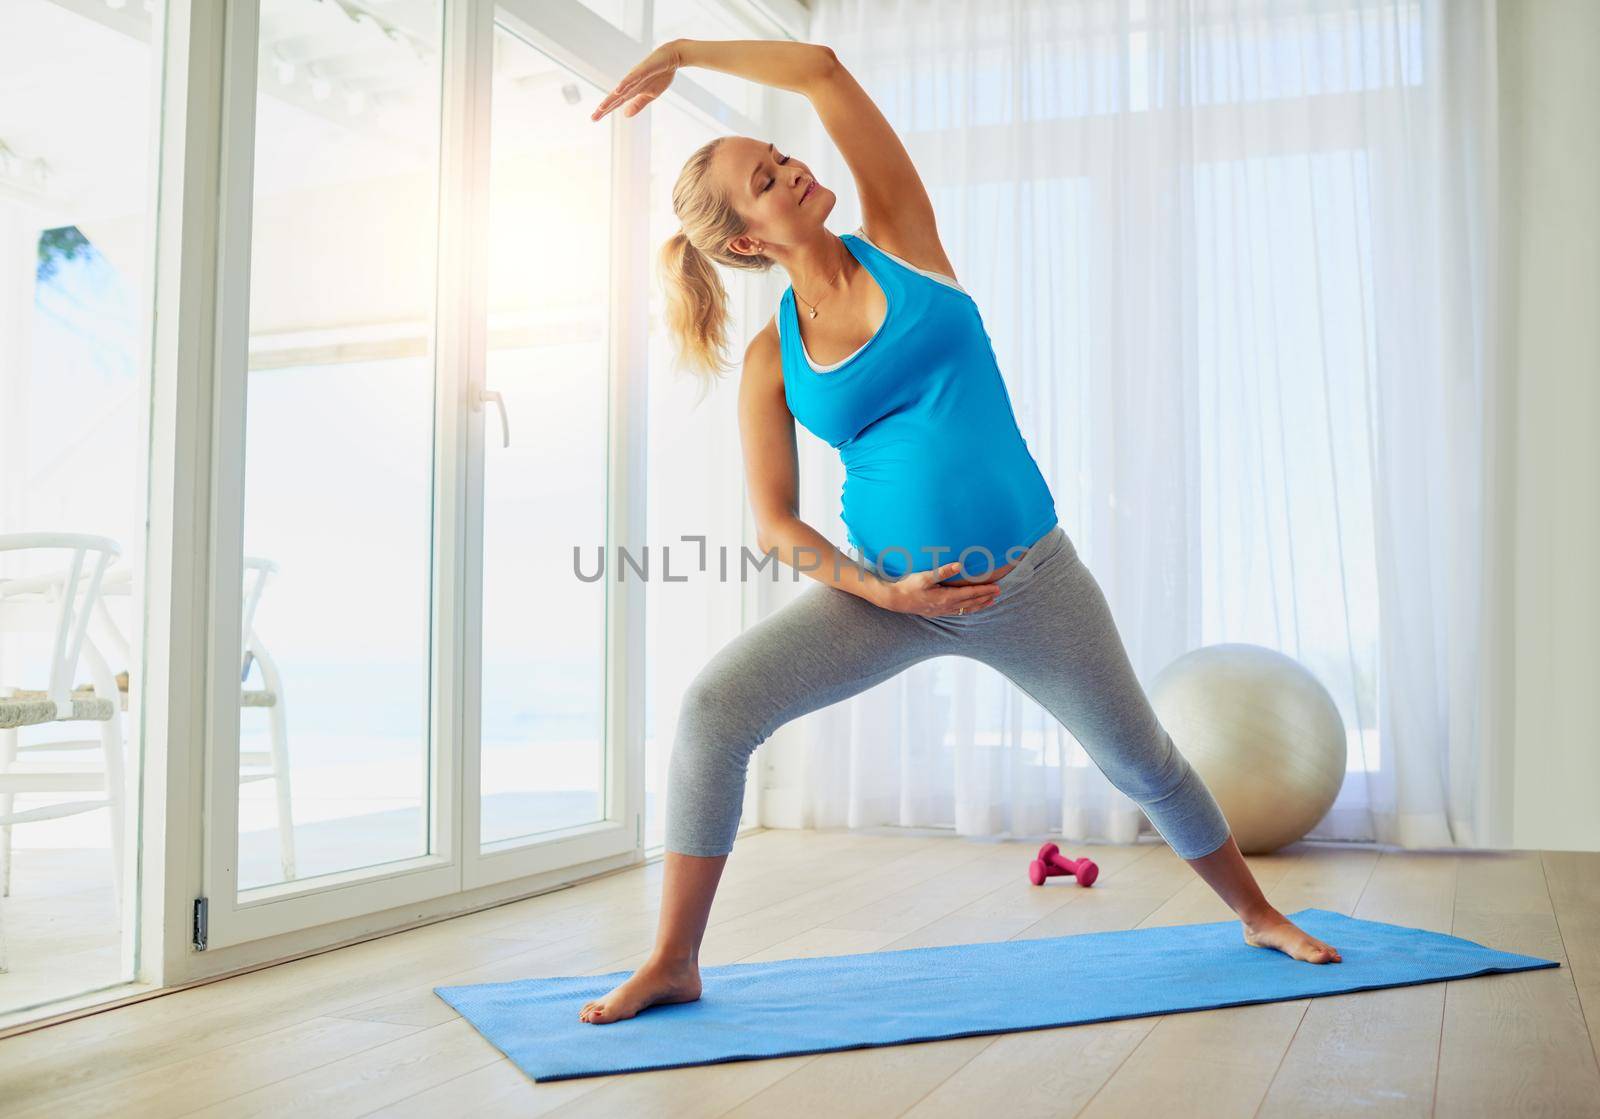 Reaching for her pregnancy fitness goals. Shot of a pregnant woman working out on an exercise mat at home. by YuriArcurs